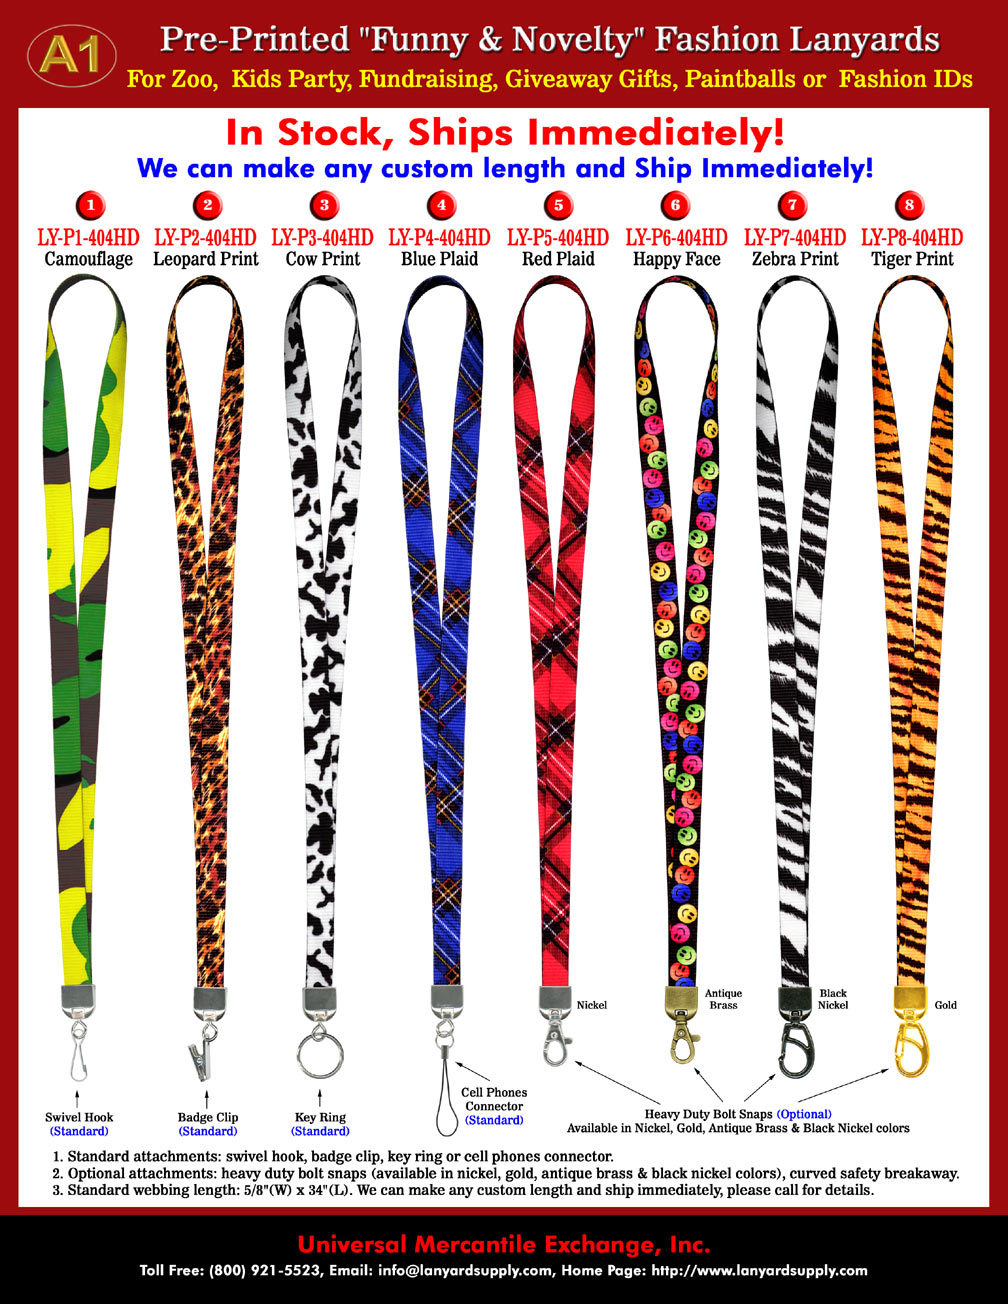 Pre-Printed Fancy Mobile Cellular, Palm Pilot, Mobile and Photo Cell Phone Straps, Lanyards, Holders - Cell Phone Accessory Strap Supplies.